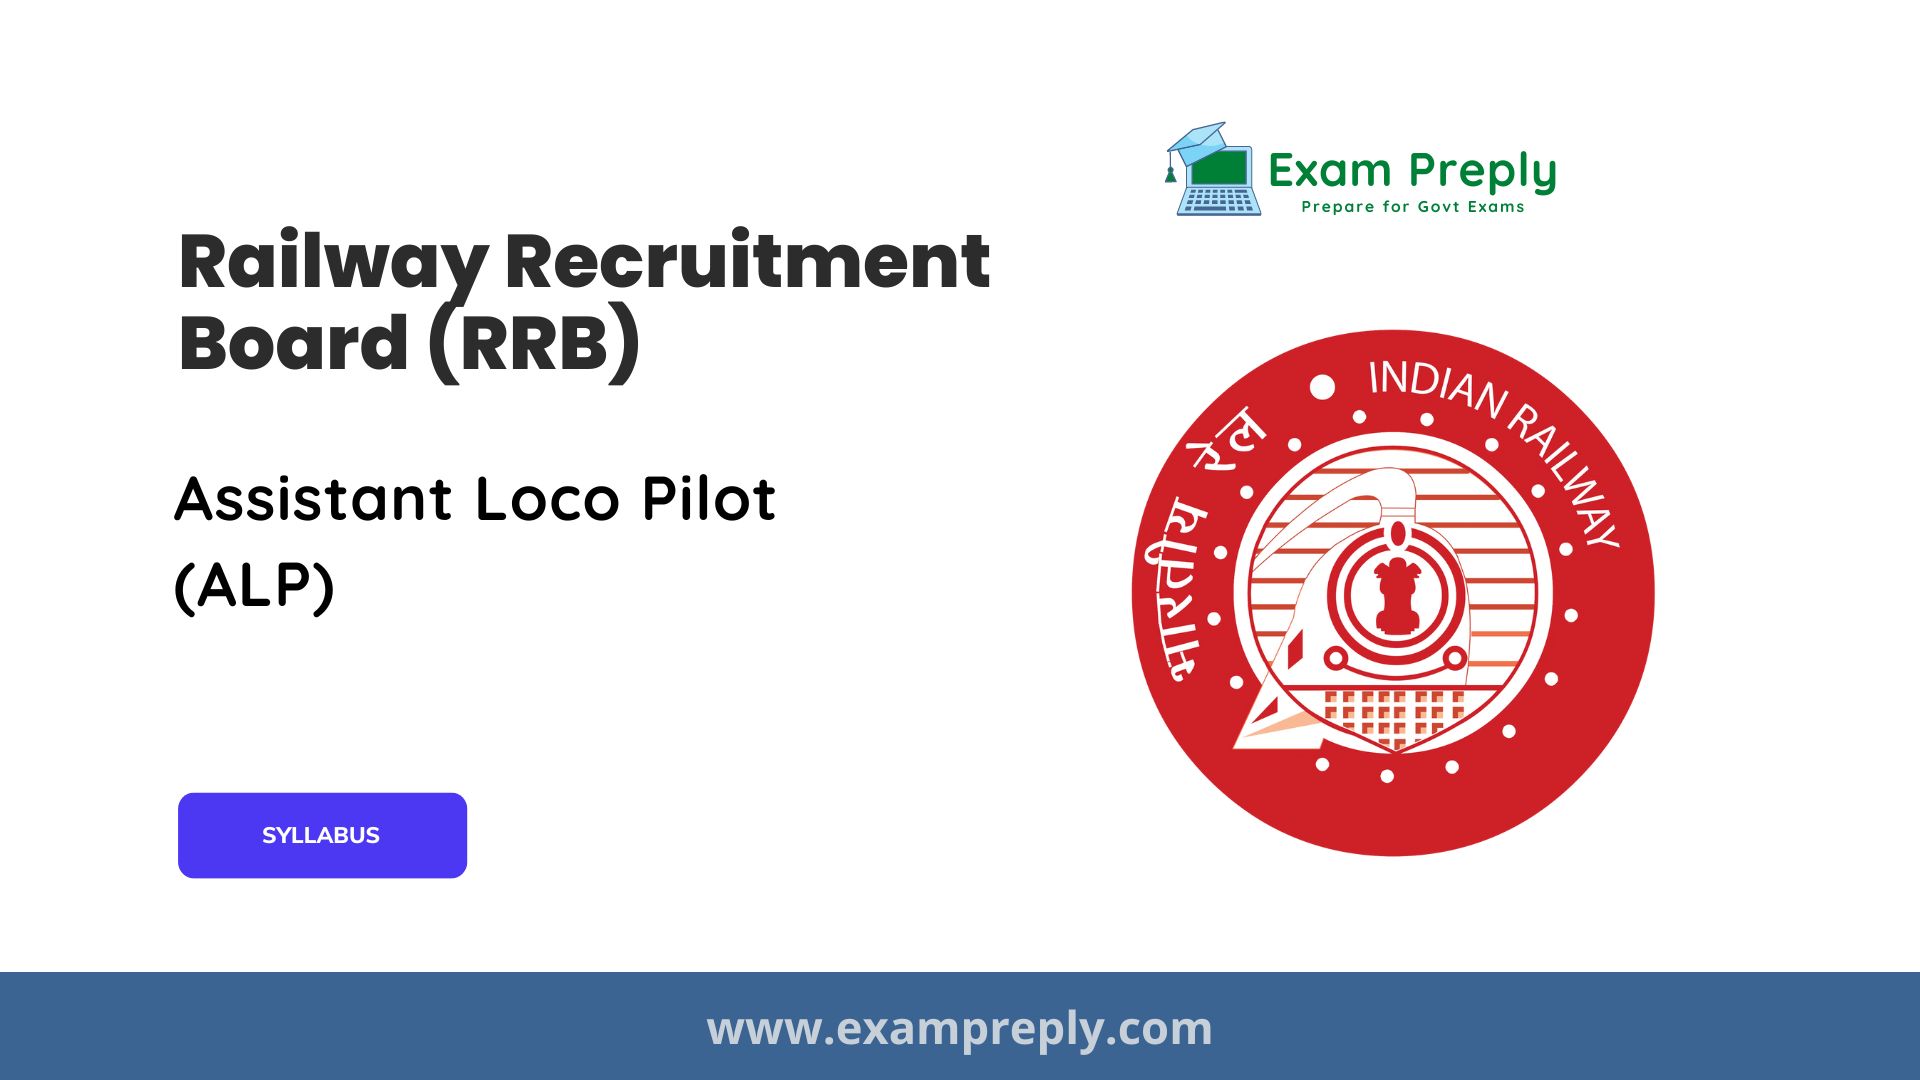 RRB Assistant Loco Pilot ALP Syllabus And Exam Pattern Exam Preply